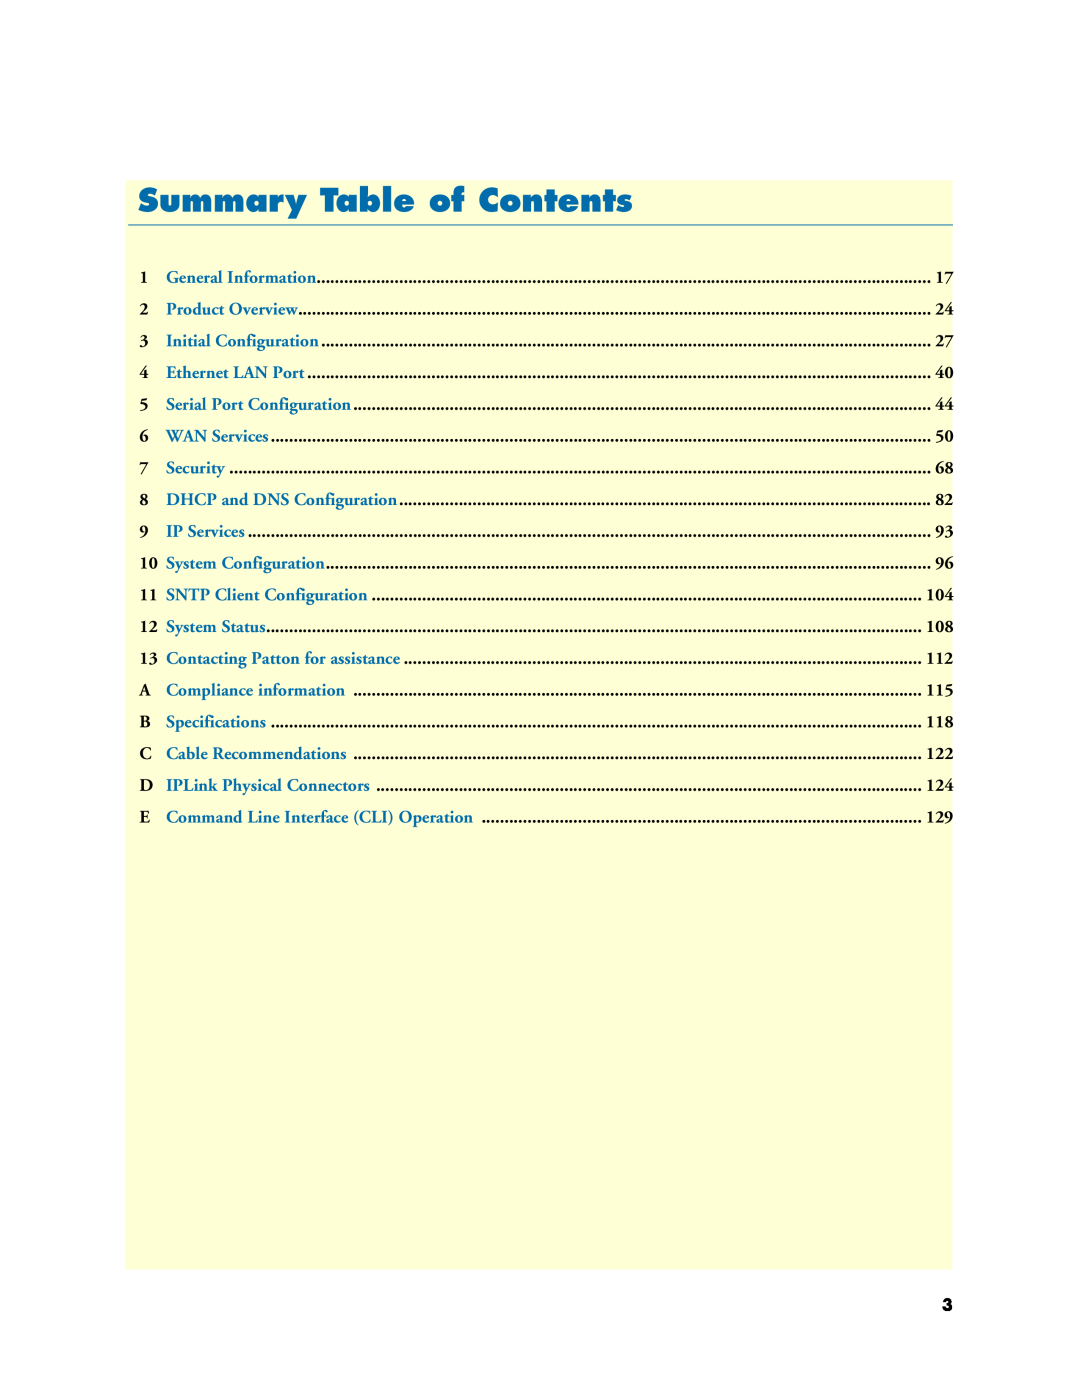 Patton electronic 2635 Summary Table of Contents, General Information, Product Overview, Initial Configuration, Security 